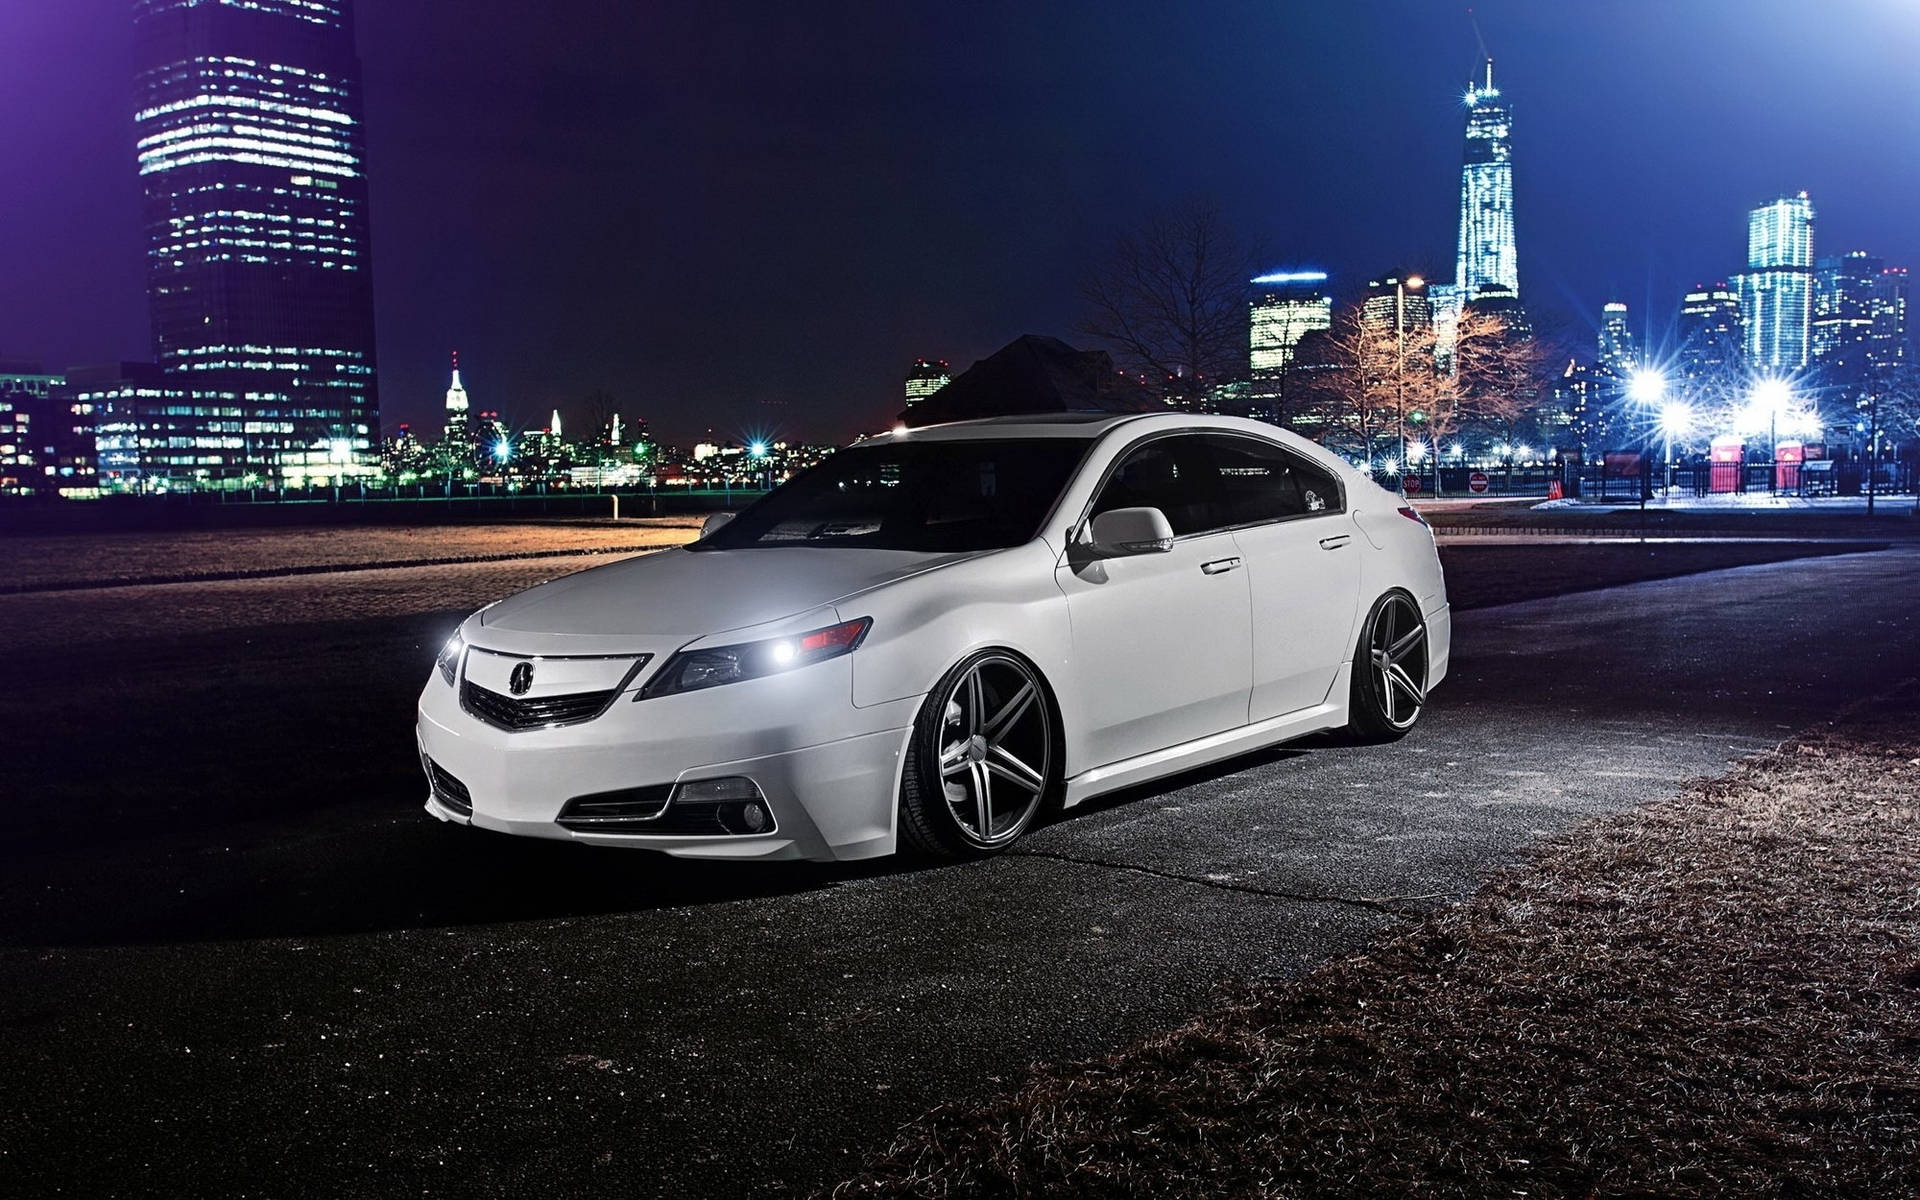 Free Acura Wallpaper Downloads, [100+] Acura Wallpapers for FREE |  